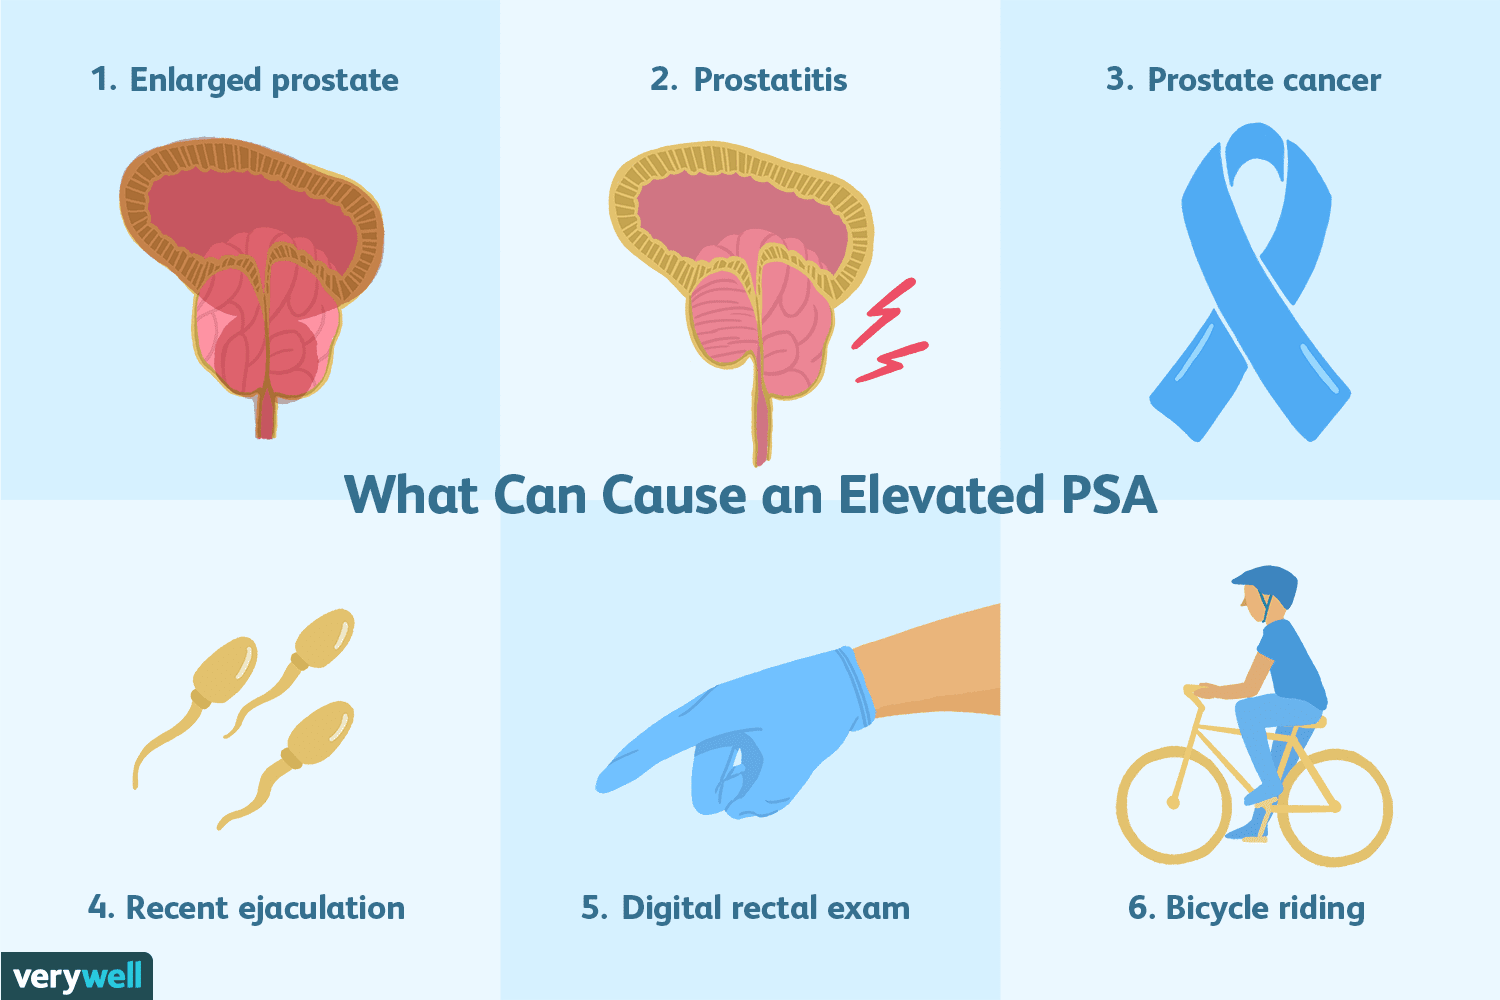 Overview of the Prostate